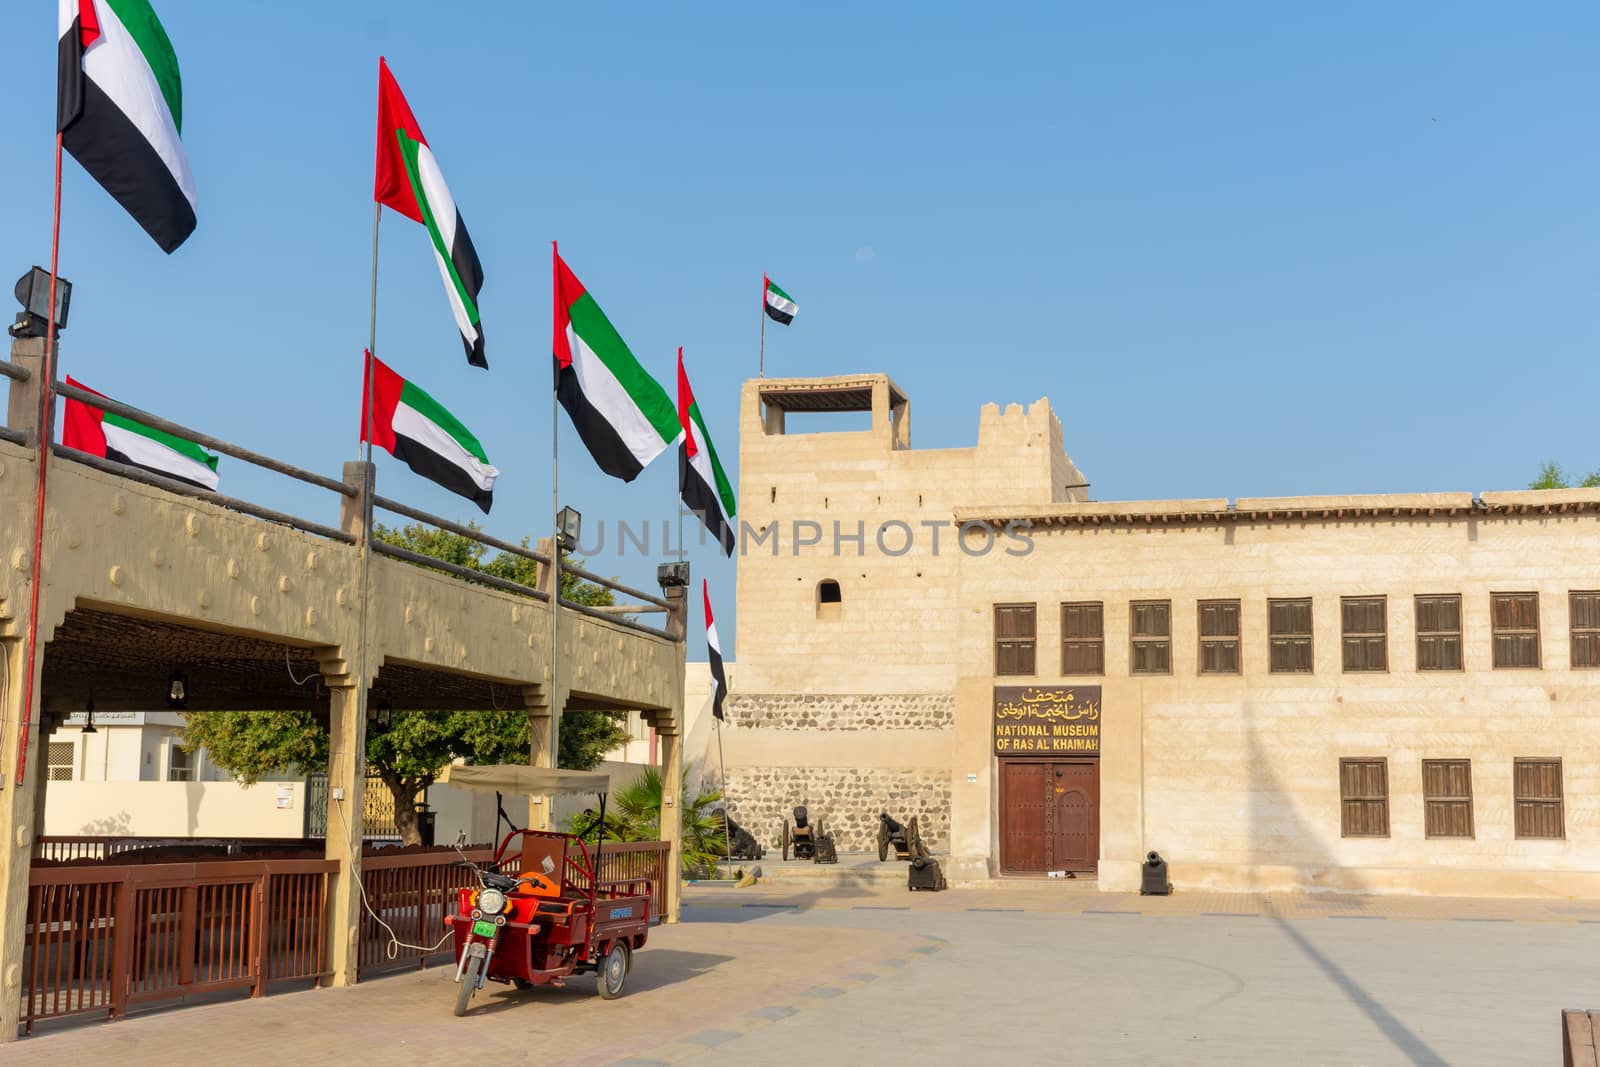 Entrance of the Ras al Khaimah Museum in the morning sun with flags blowing.